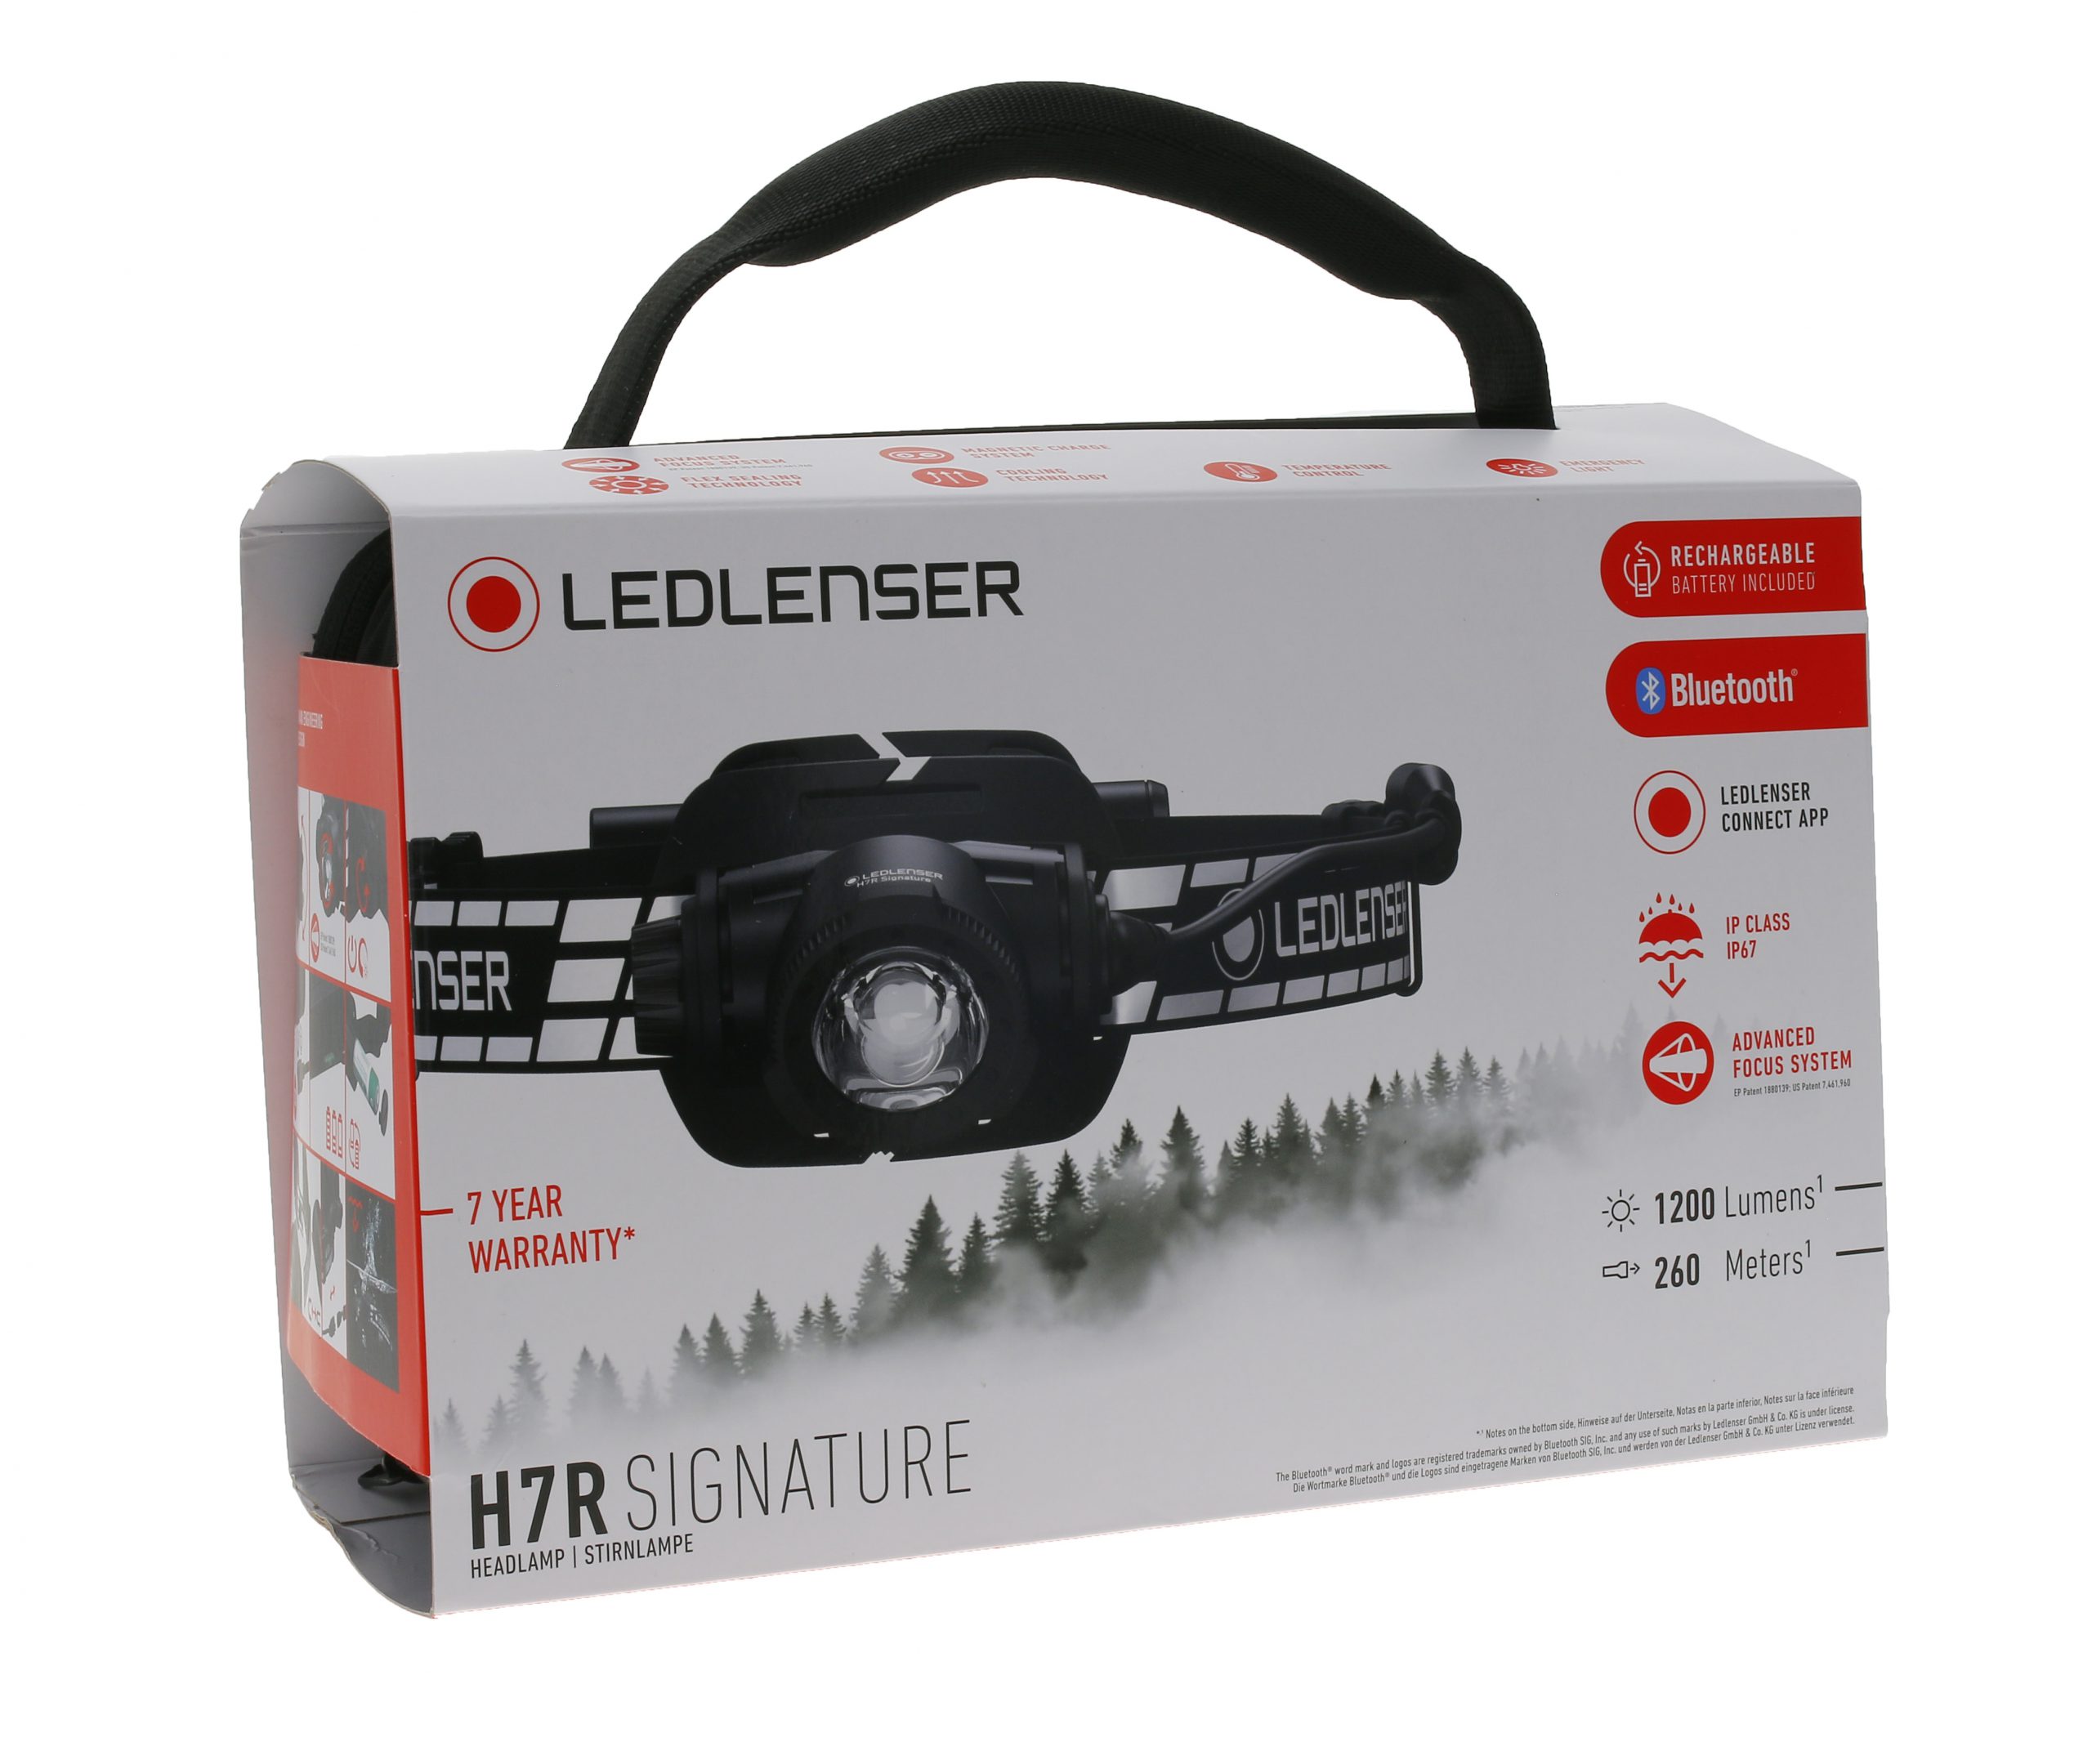 Led Lenser H7R SIGNATURE LED Headlamp (SG1200) Stealth Mode Suppliers  Of Top Quality Workwear